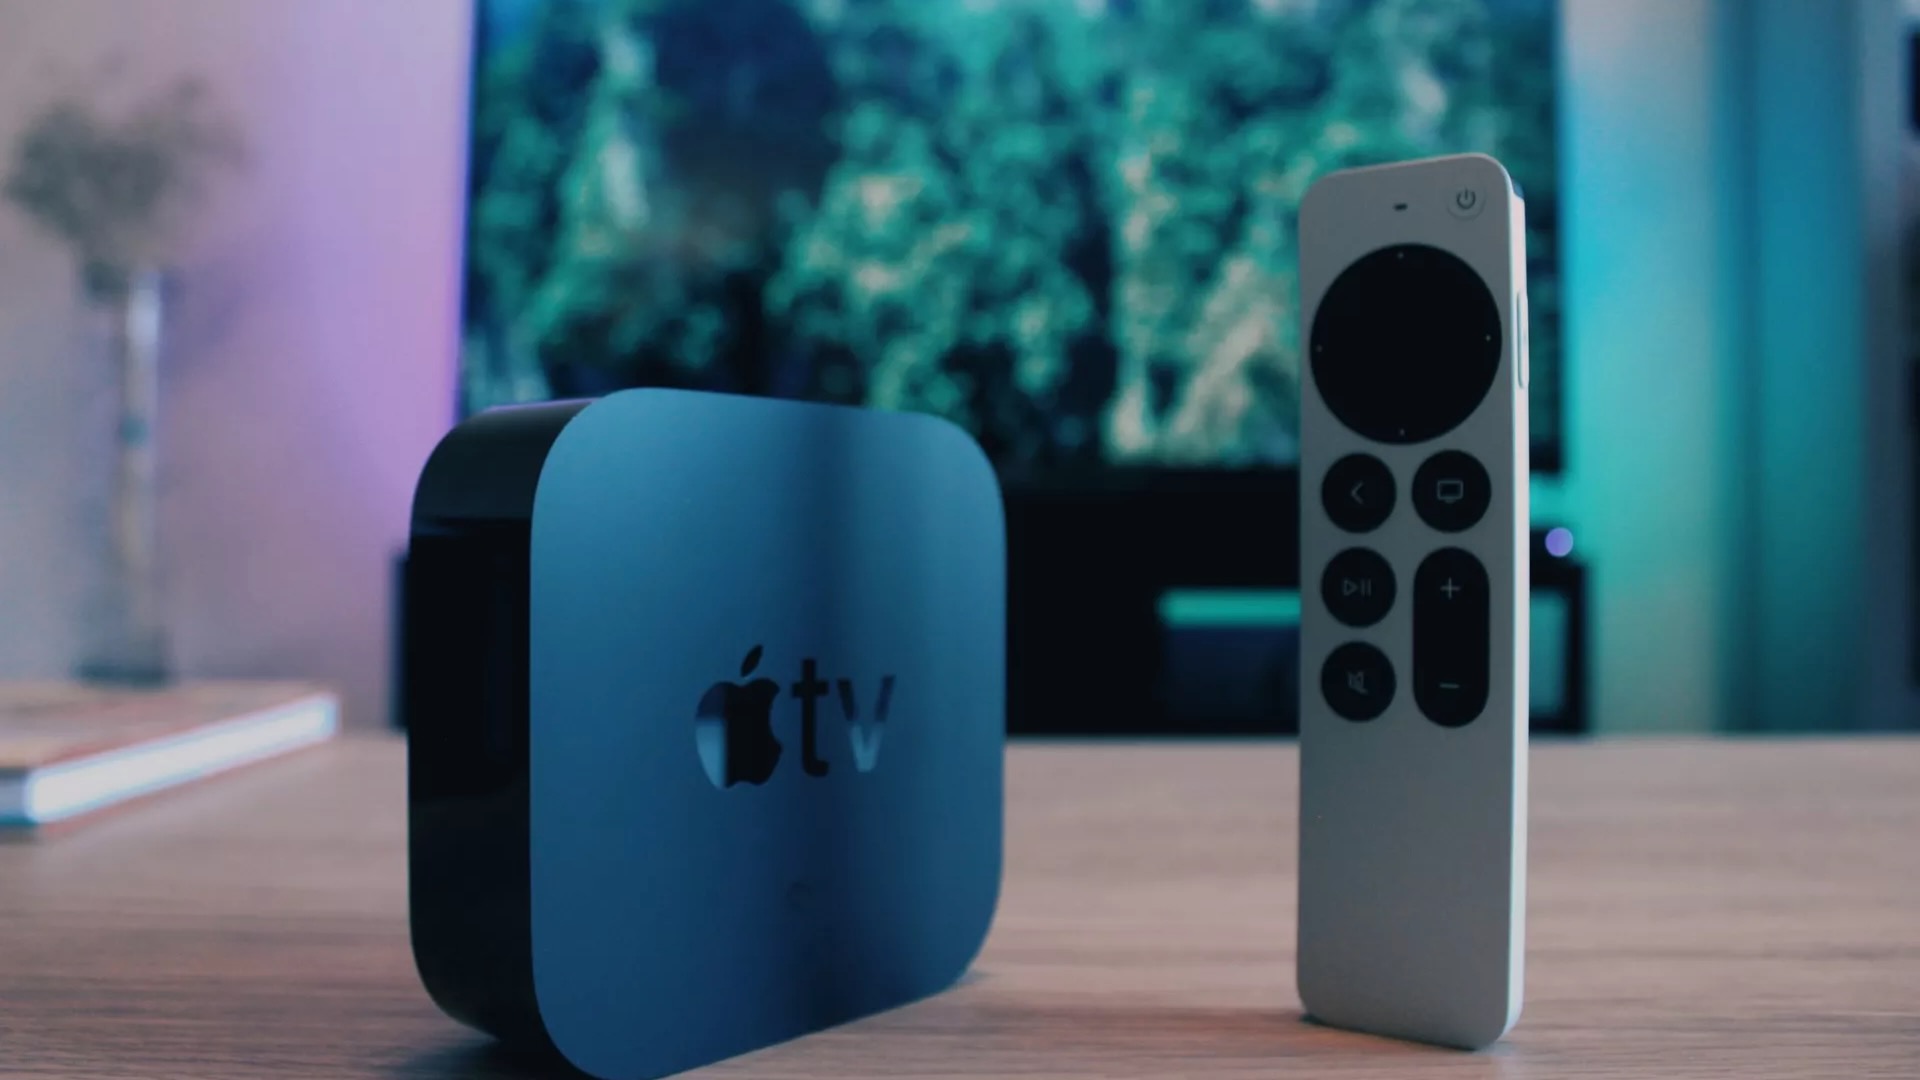 Here's another reason to ditch your Amazon Fire TV Stick for the Apple TV 4K